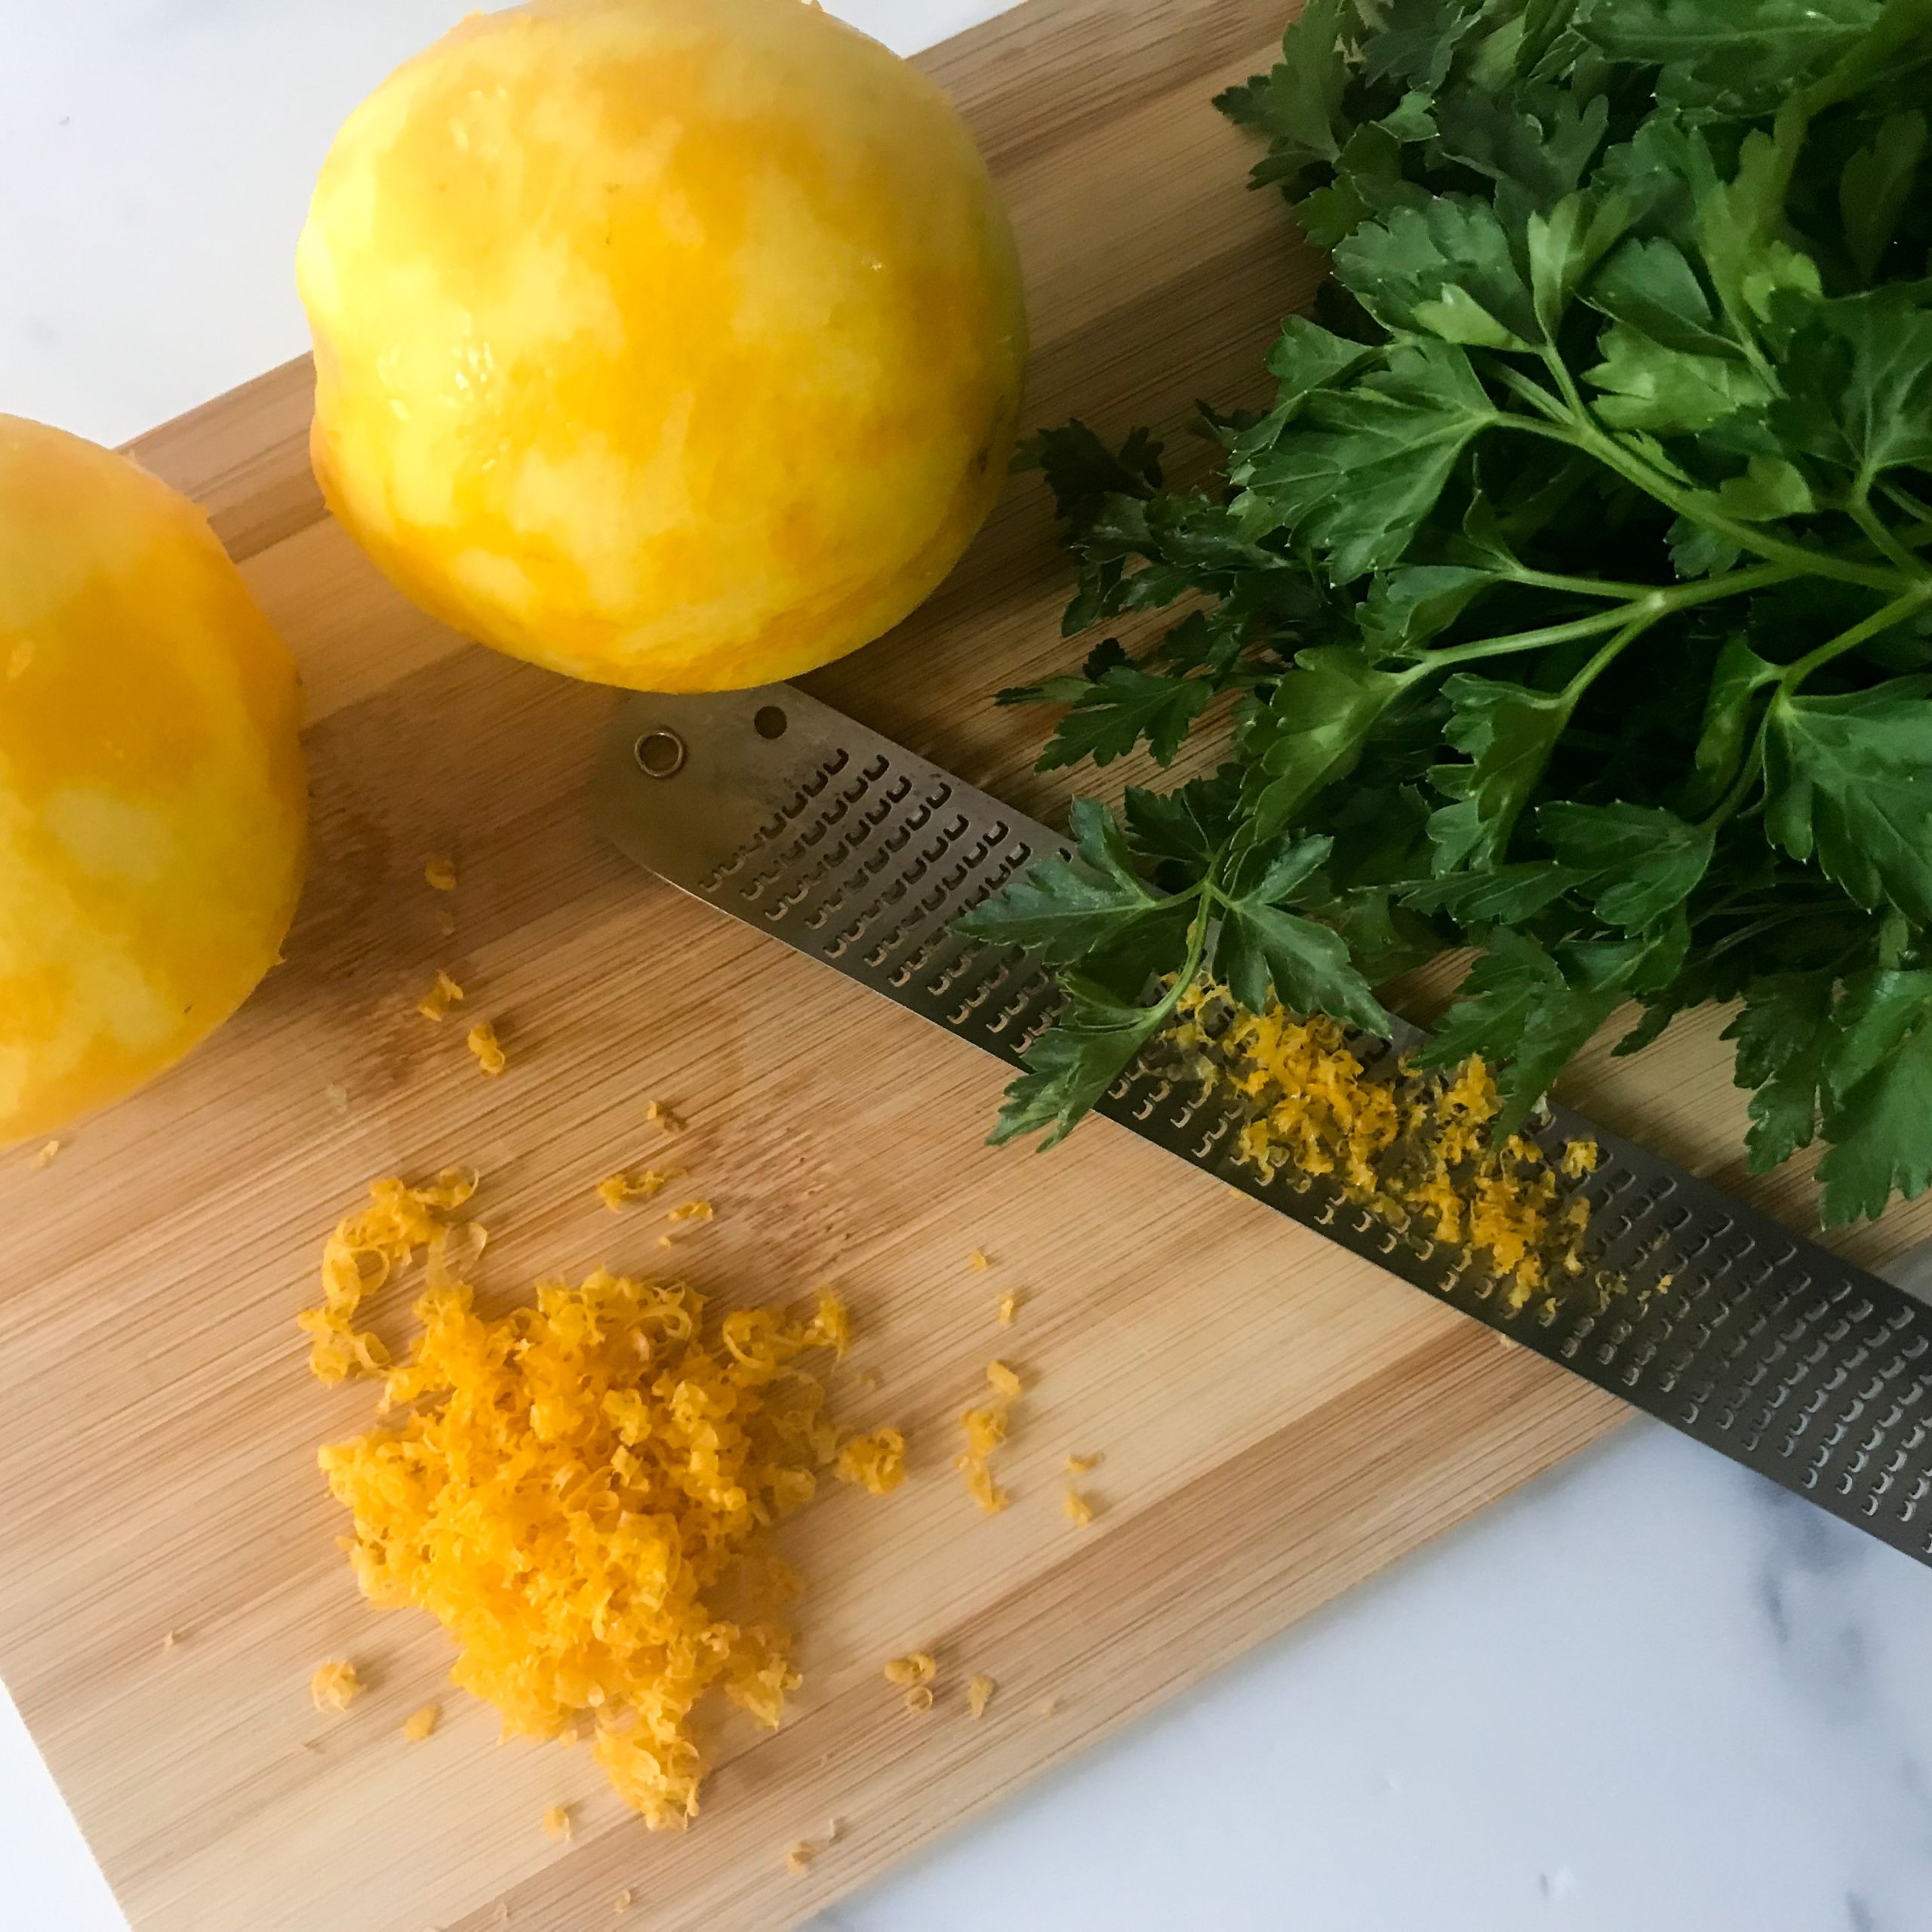 grated lemon zest and parsley on board | my curated tastes